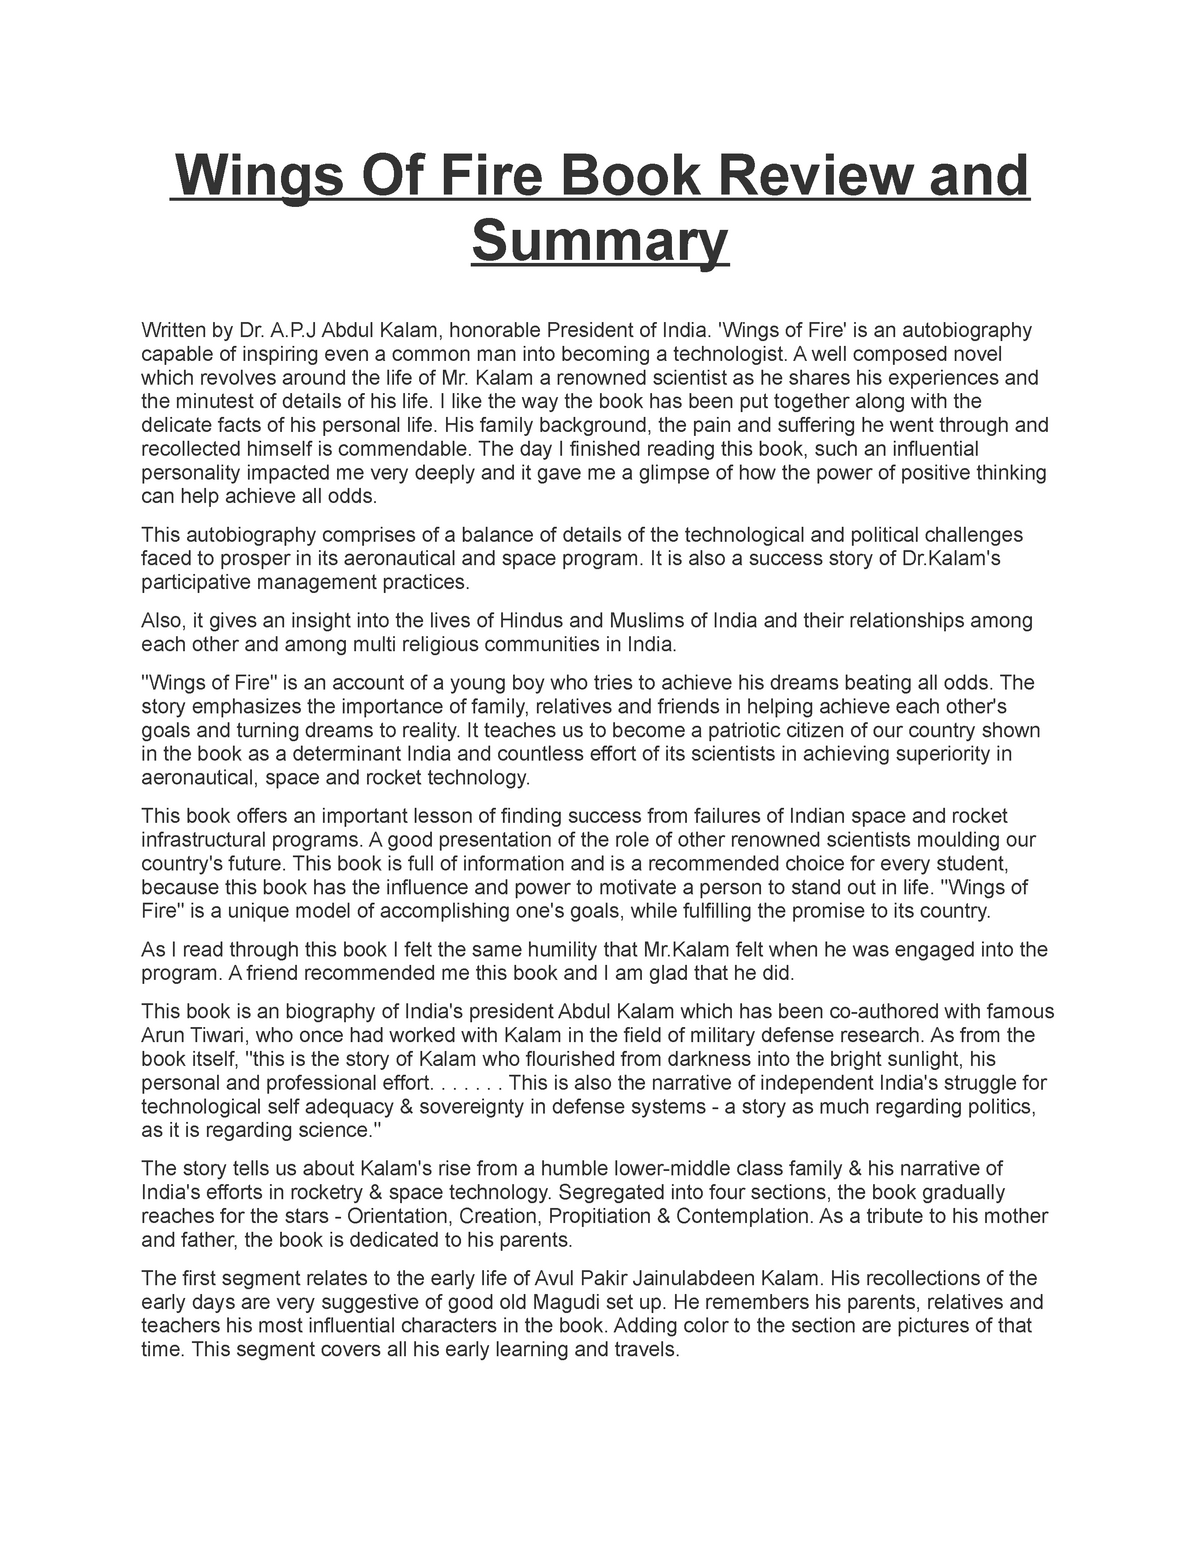 book review of wings of fire in english pdf